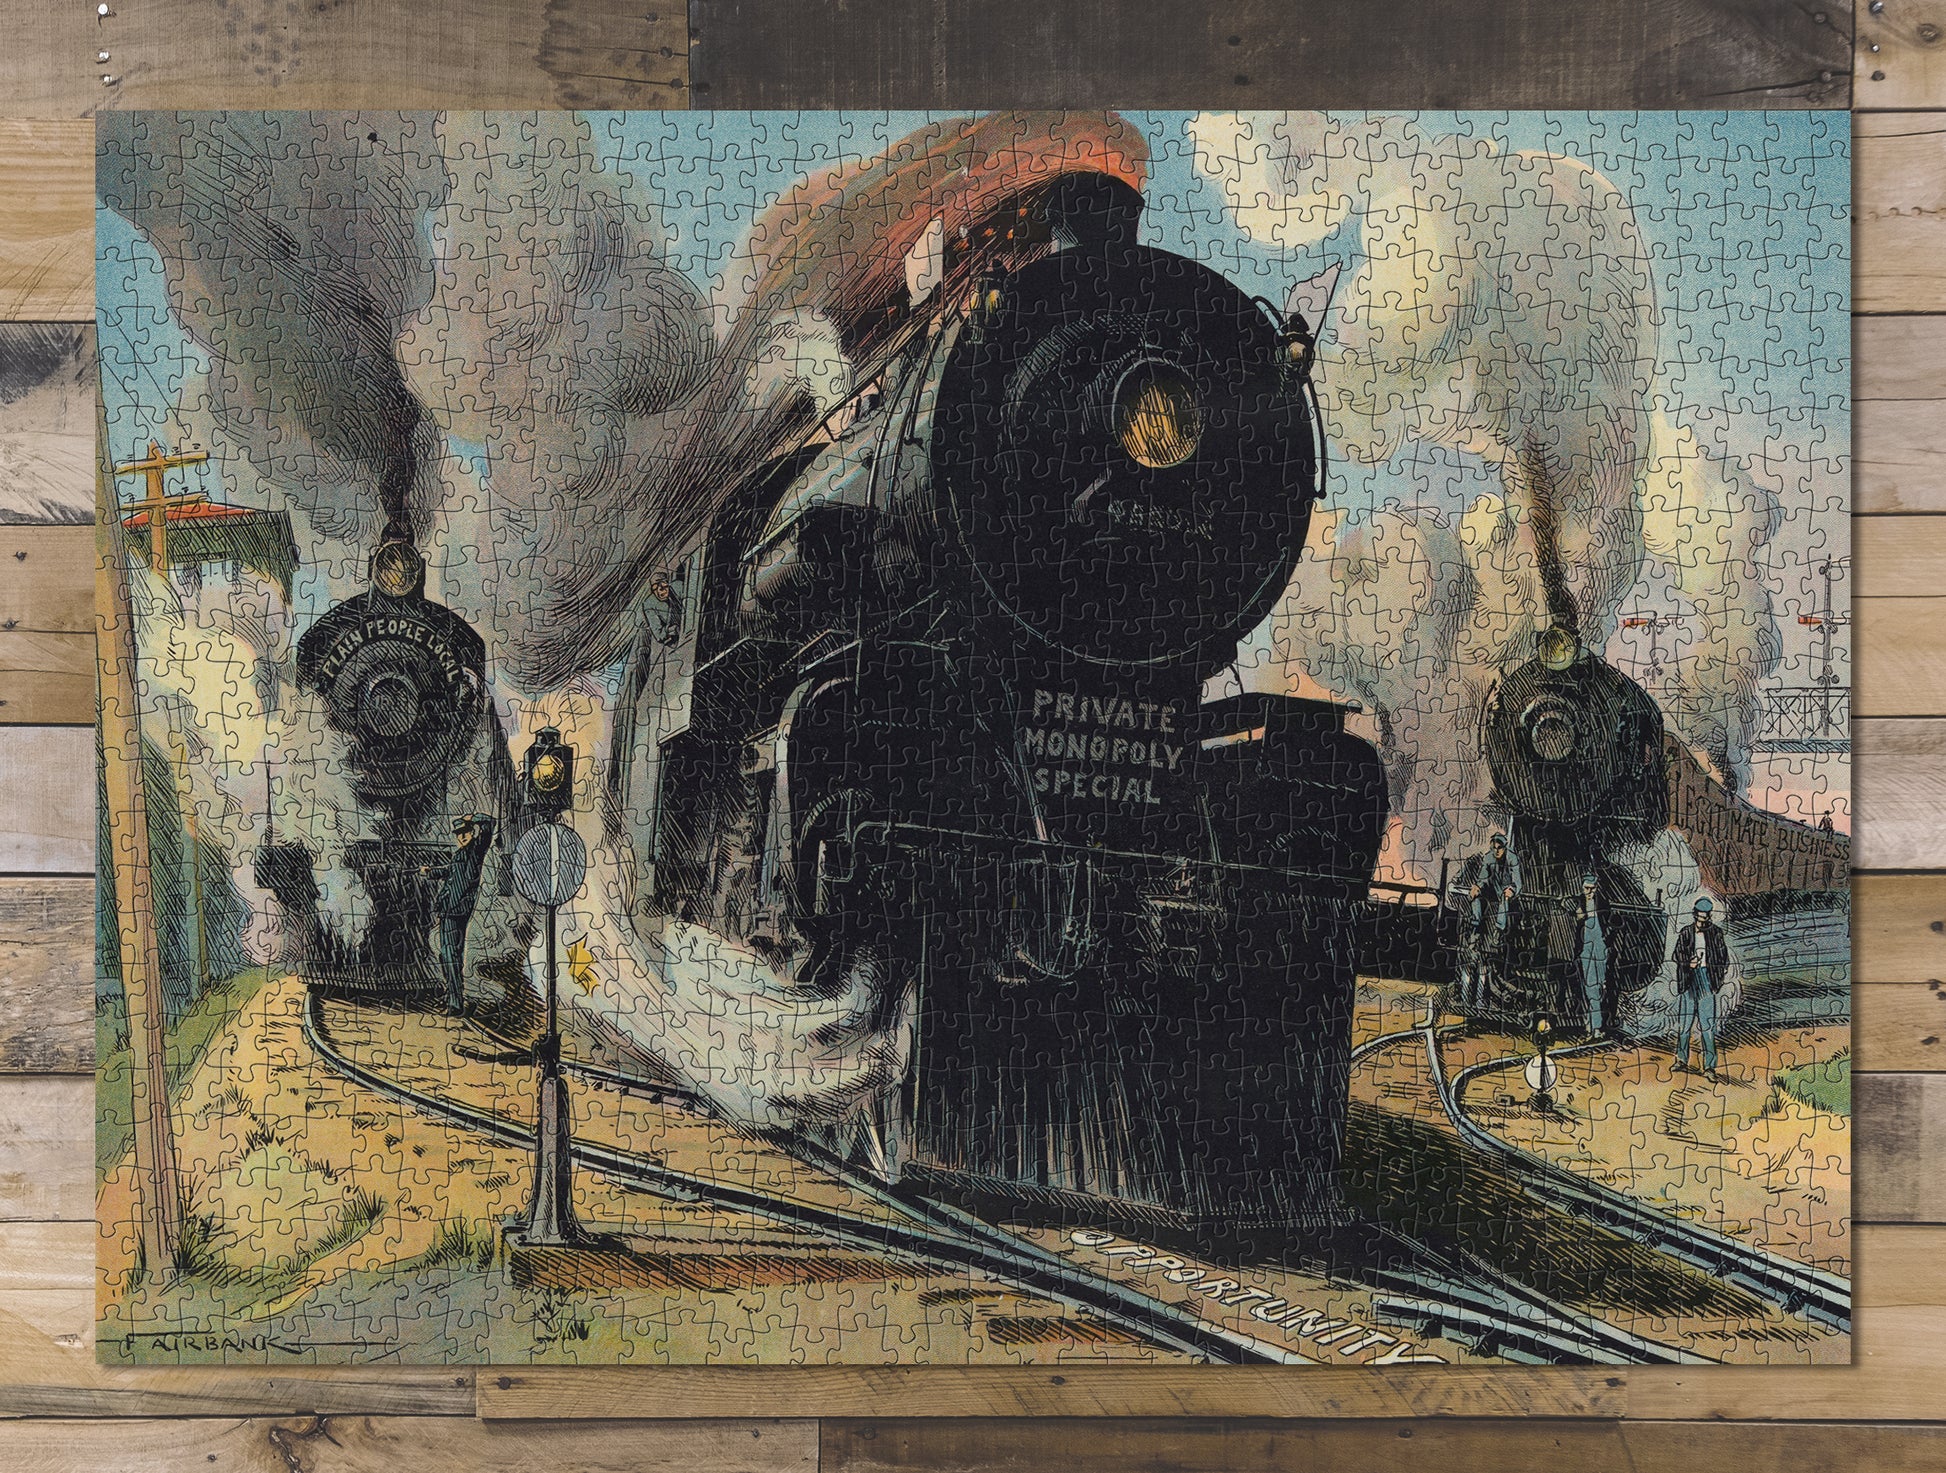 1000 piece puzzle 1910 The Right Of Way Puck locomotive racing down tracks monopoly B Fairbank